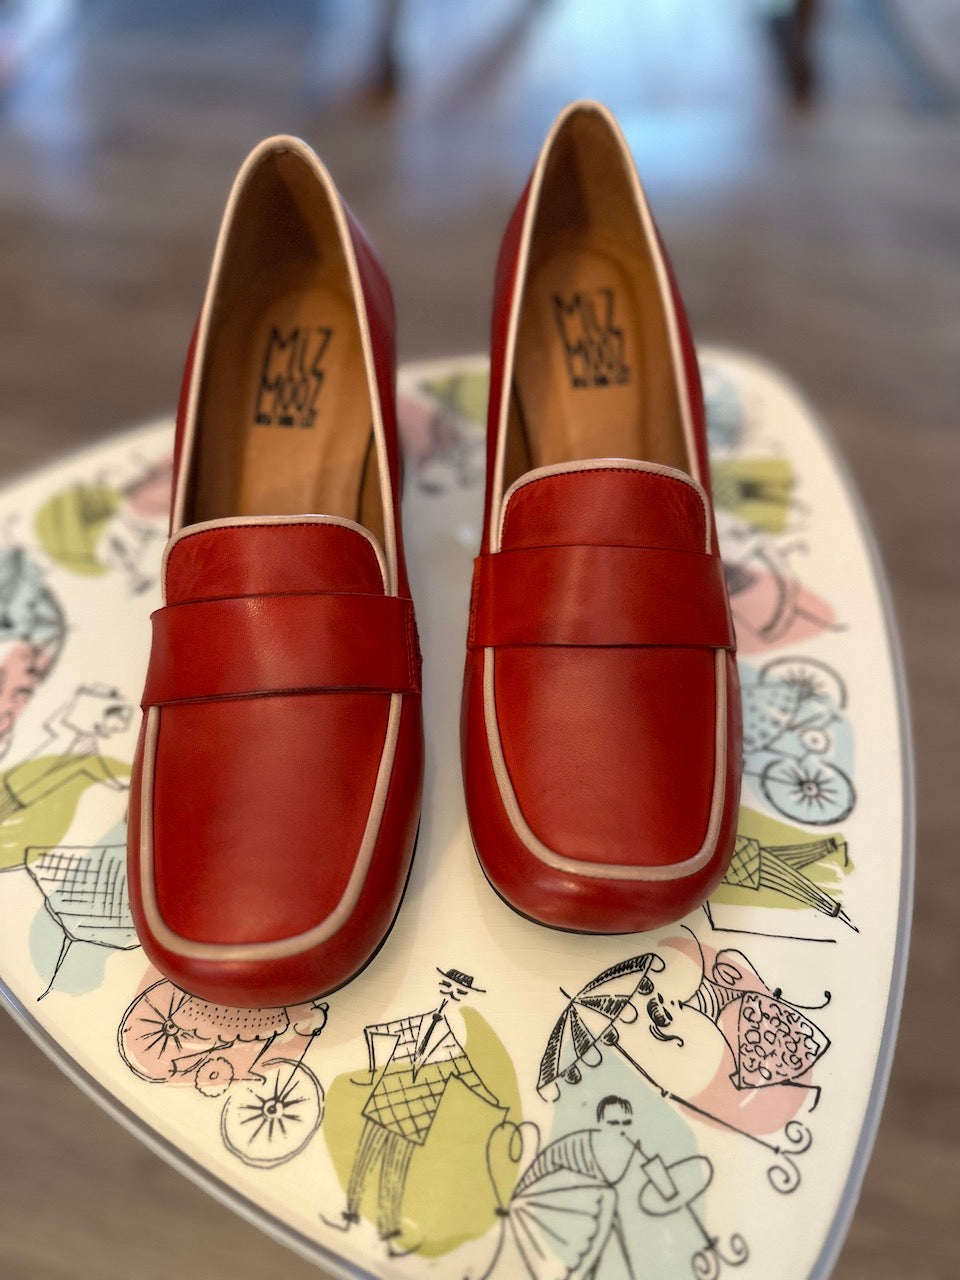 Siana Loafer Style Pumps - red